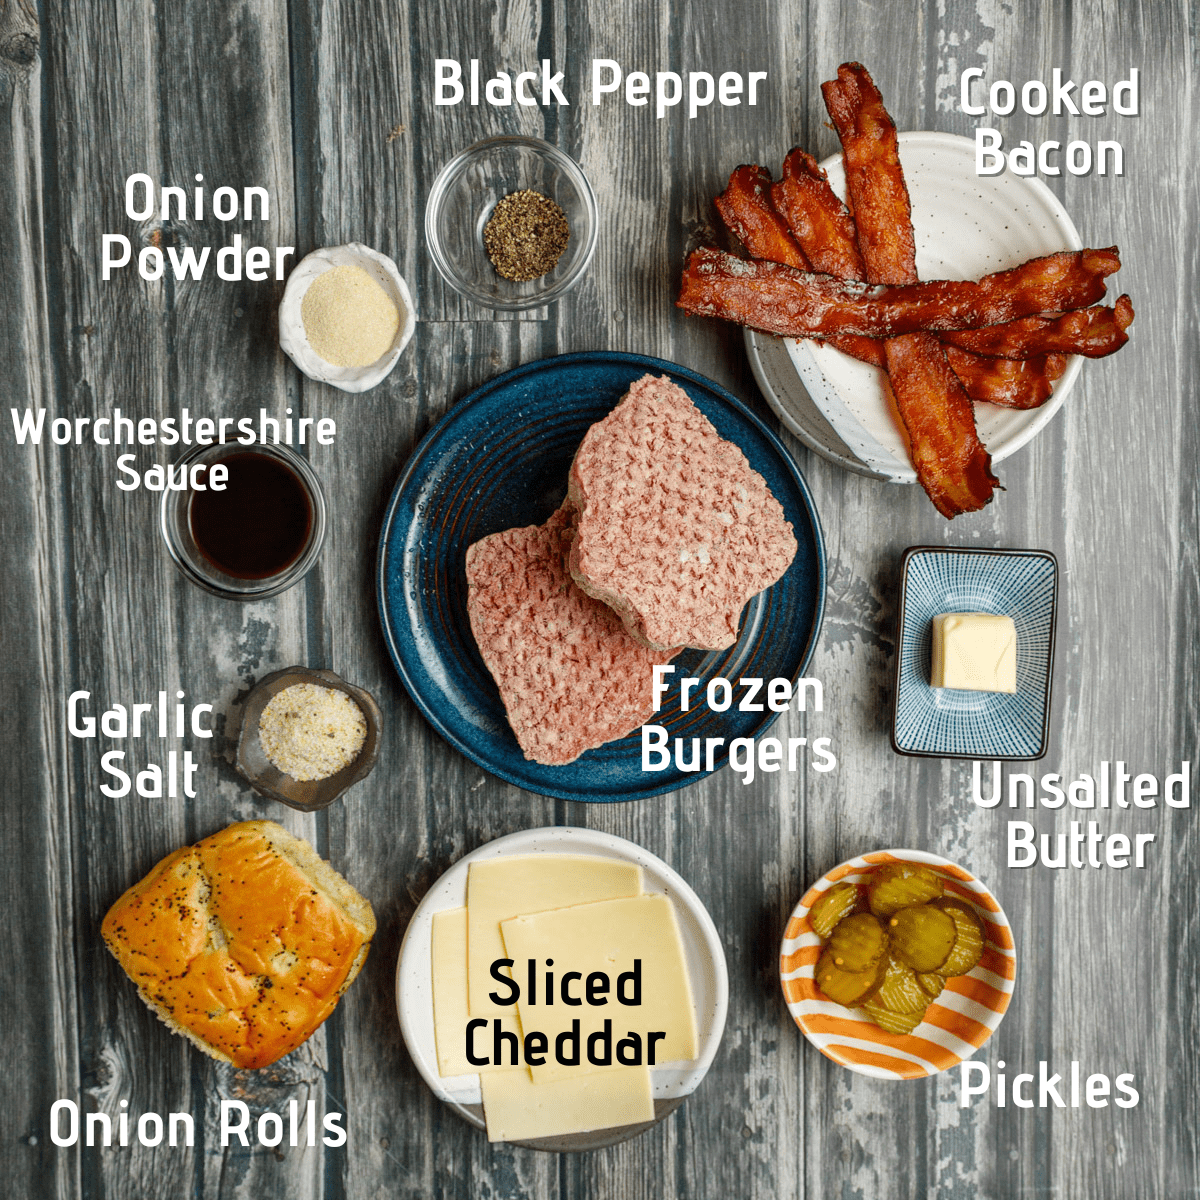 Raw ingredients on a wooden picnic table background. Ingredients are labeled in white and black font: onion powder, black pepper, cooked bacon, unsalted butter, pickles, sliced cheddar, onion rolls, garlic salt, worchestershire sauce and frozen burgers.